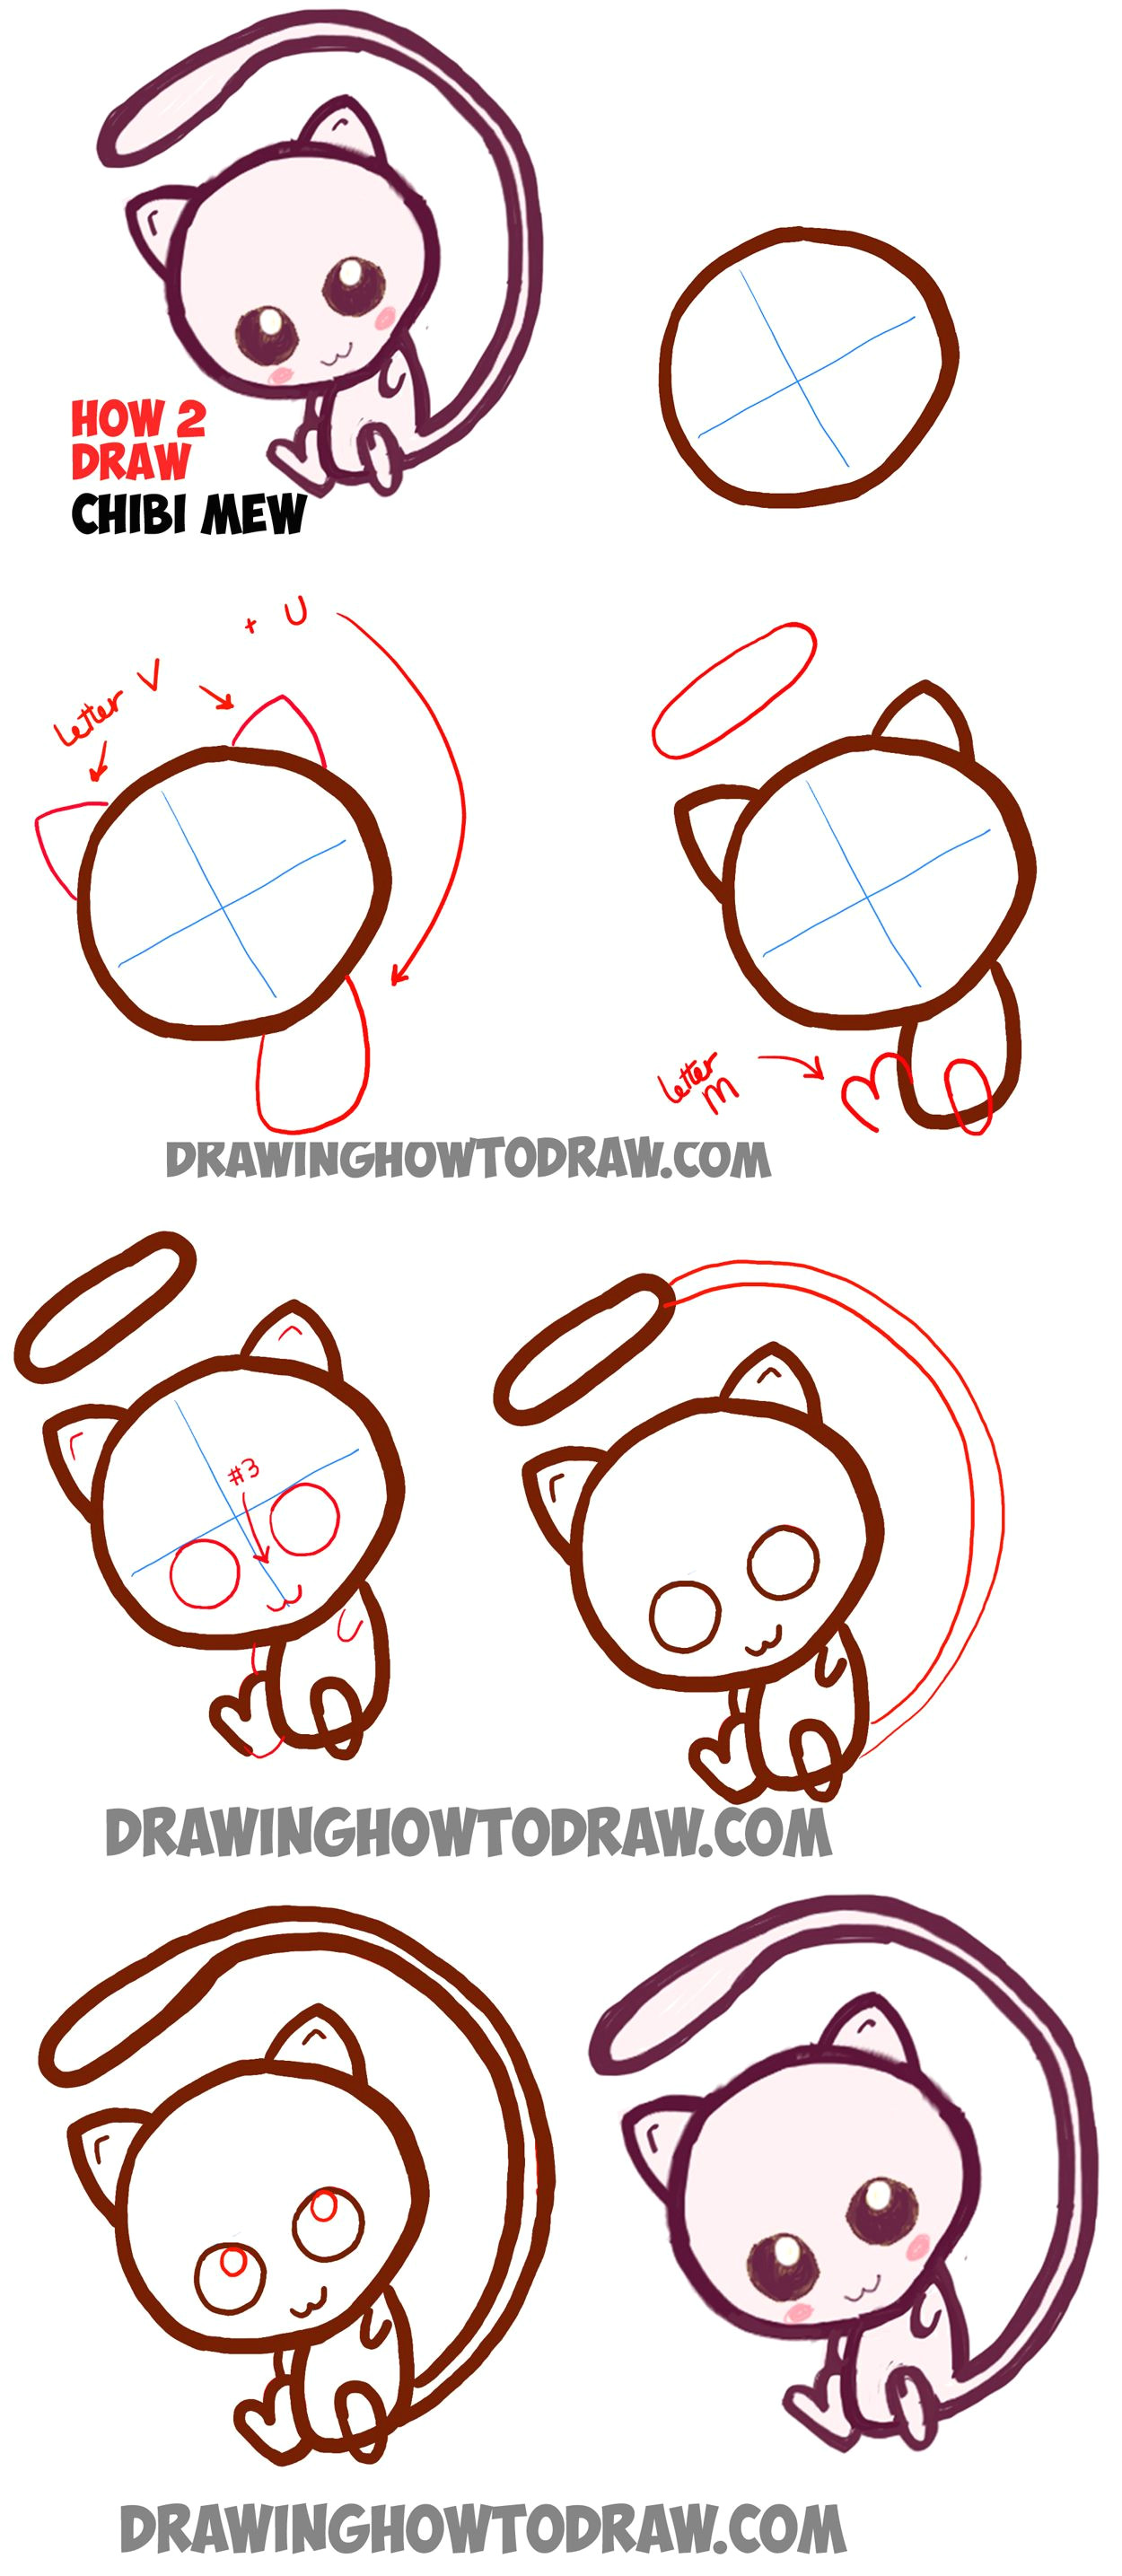 learn how to draw cute baby chibi mew from pokemon simle steps drawing lesson